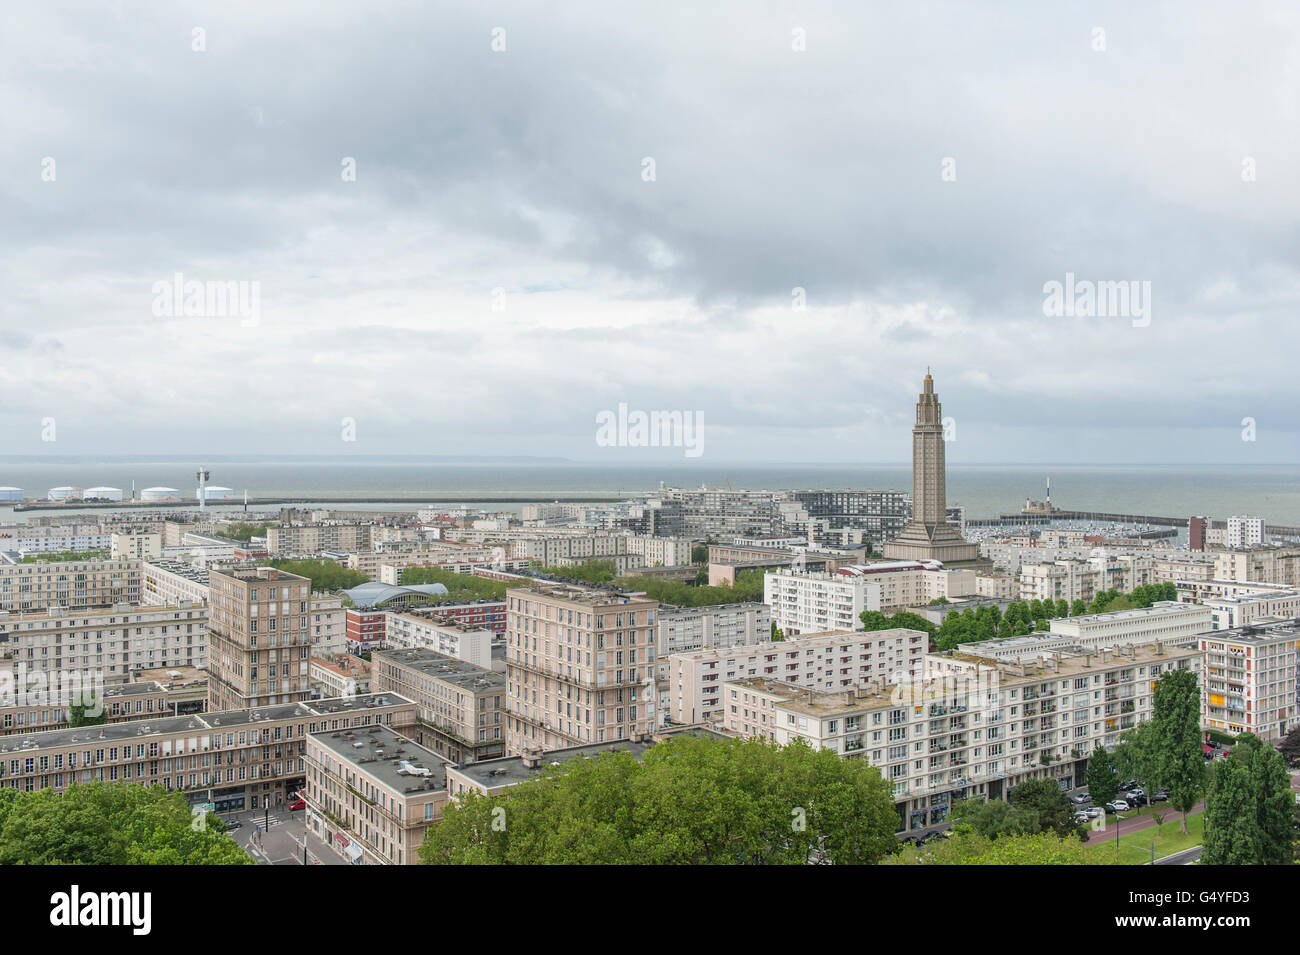 The world-heritage area of Le Havre, built by Auguste Perret with St Joseph's church as landmark, Normandy, France Stock Photo